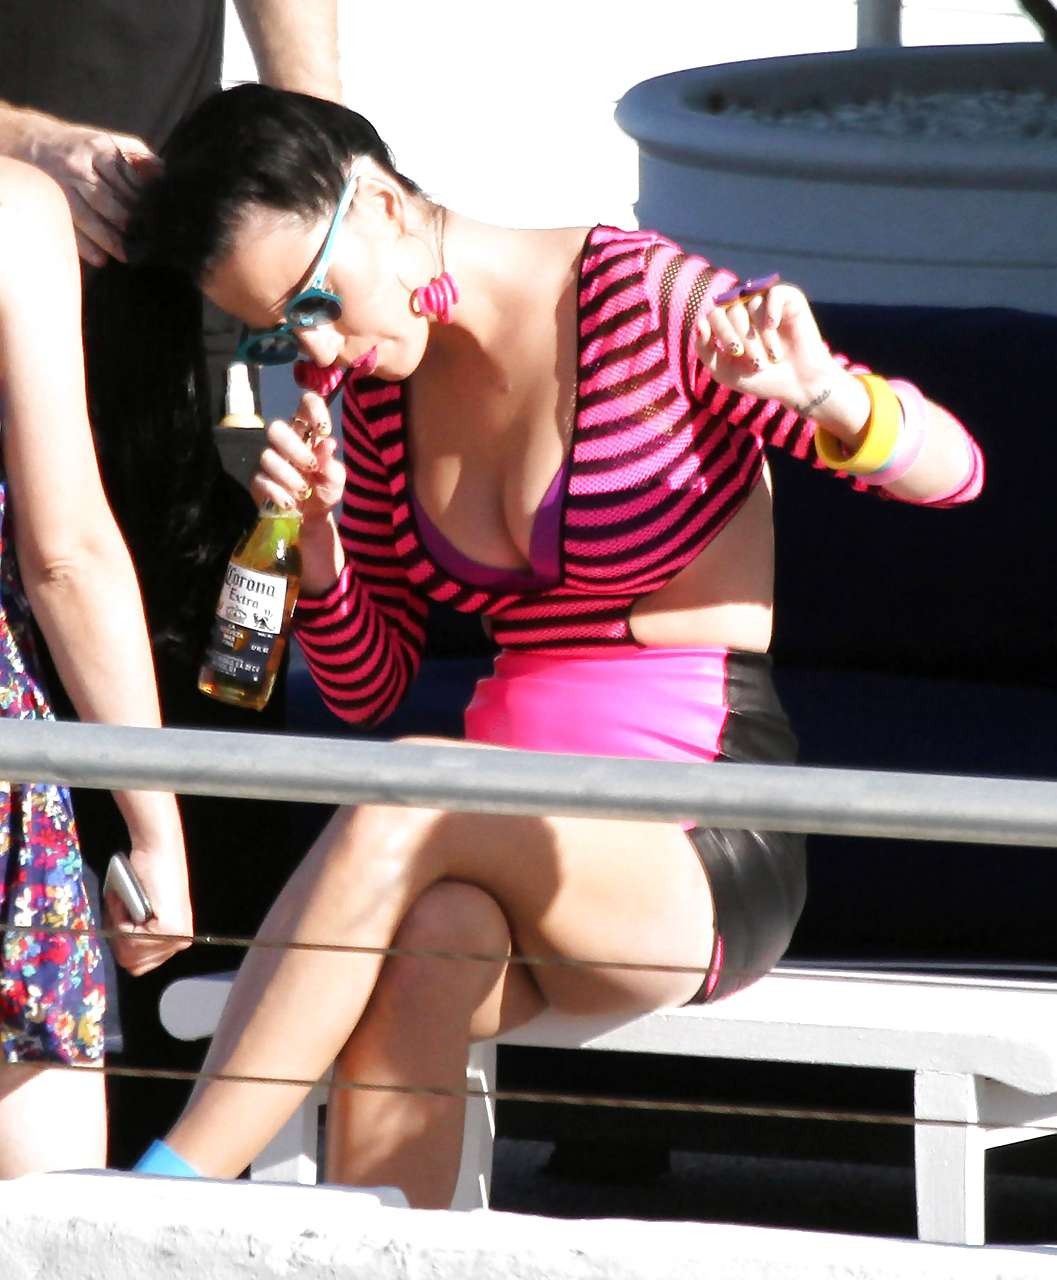 Katy Perry downblouse and upskirt in mini skirt paparazzi pictures #75301604